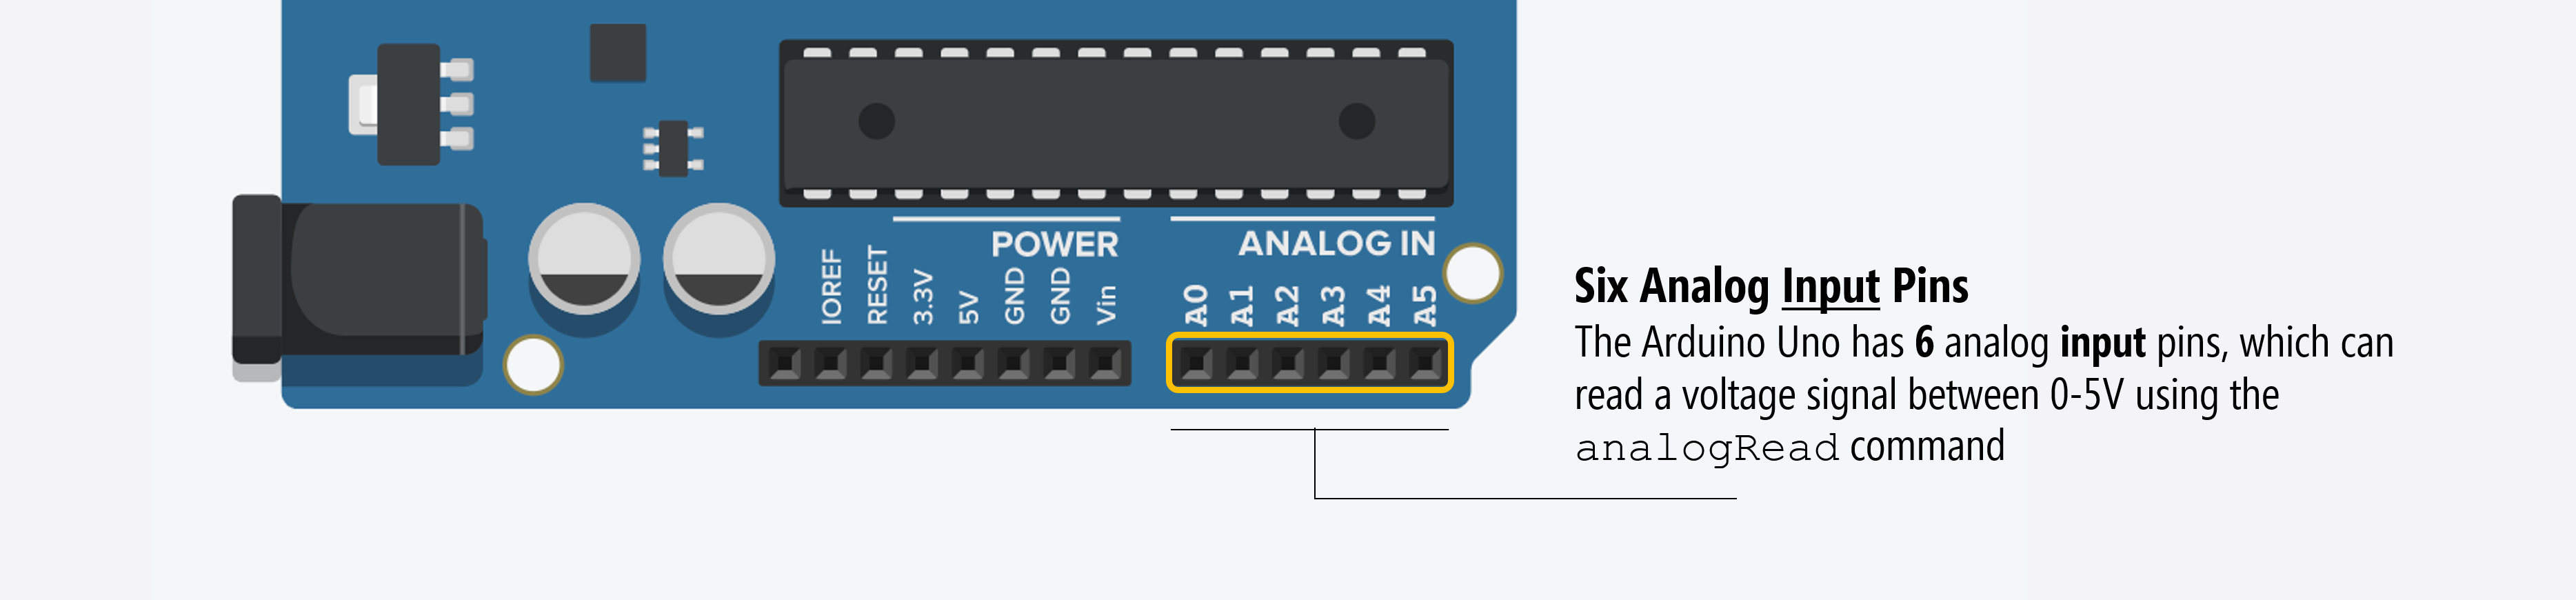 Close-up image of the six analog input pins on the Arduino Uno